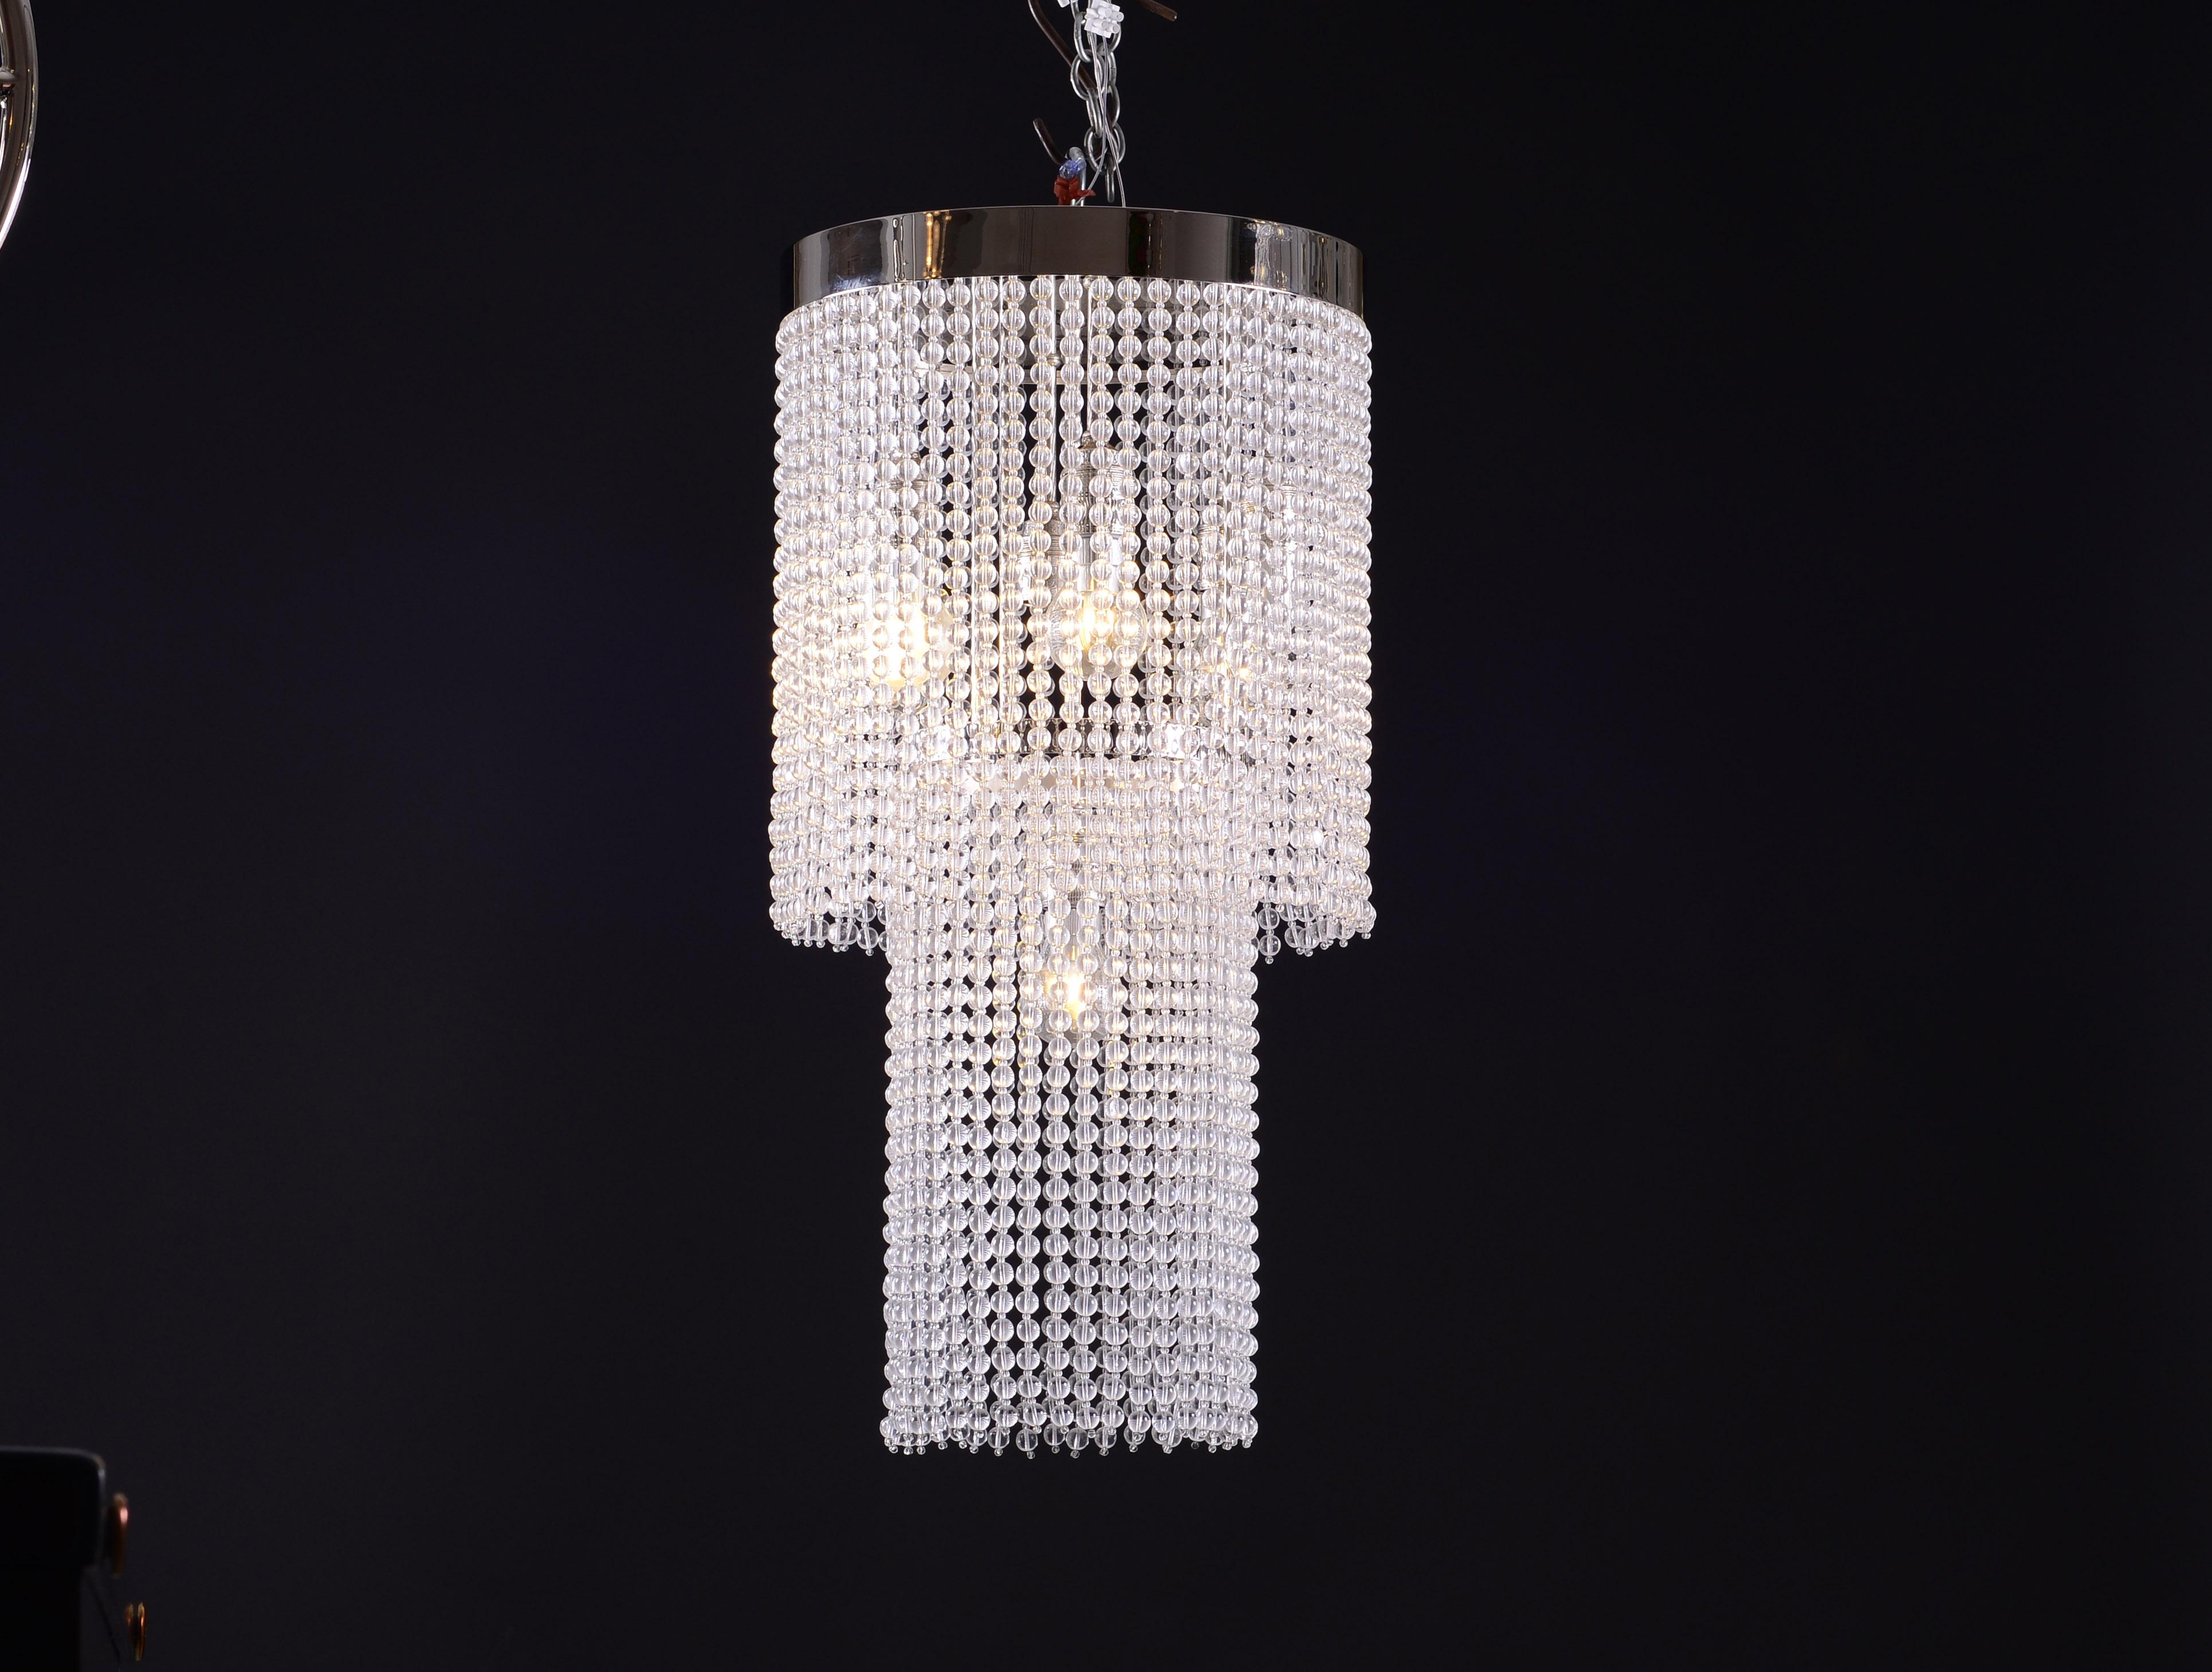 Chandelier, also used by Hoffman at the Hohe Warte buildings Brauner and Hochstaetter, 1905-1907; Salon Beer-Hofmann 
Originally manufactured at the Wiener Werkstatte, now manufactured at the WOKA workshop in Vienna.

Most components according to